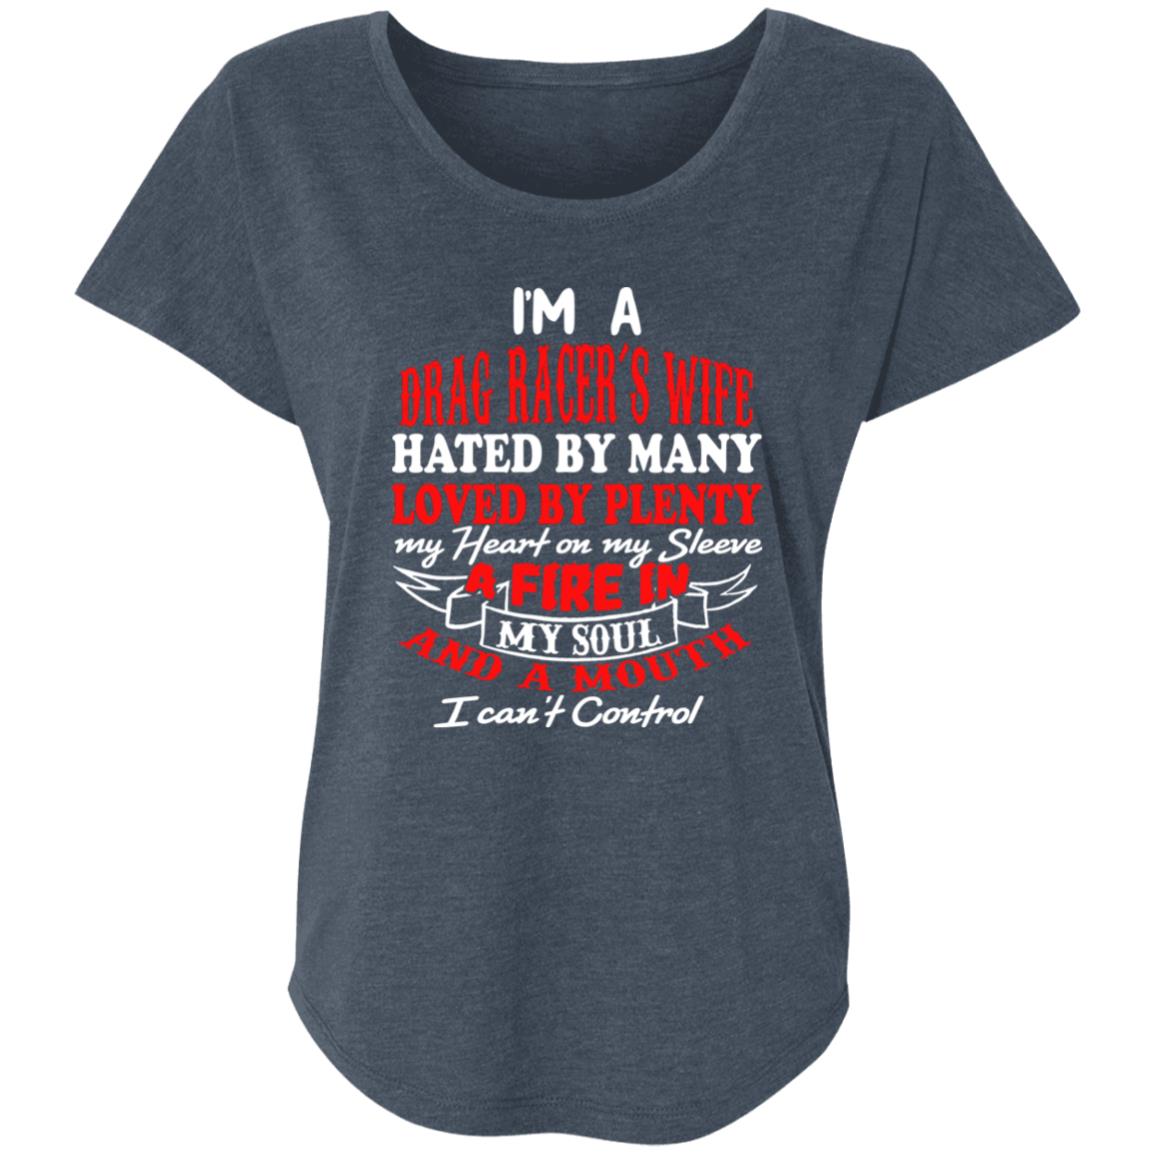 I'm A Drag Racer's Wife Hated By Many Loved By Plenty Ladies' Triblend Dolman Sleeve